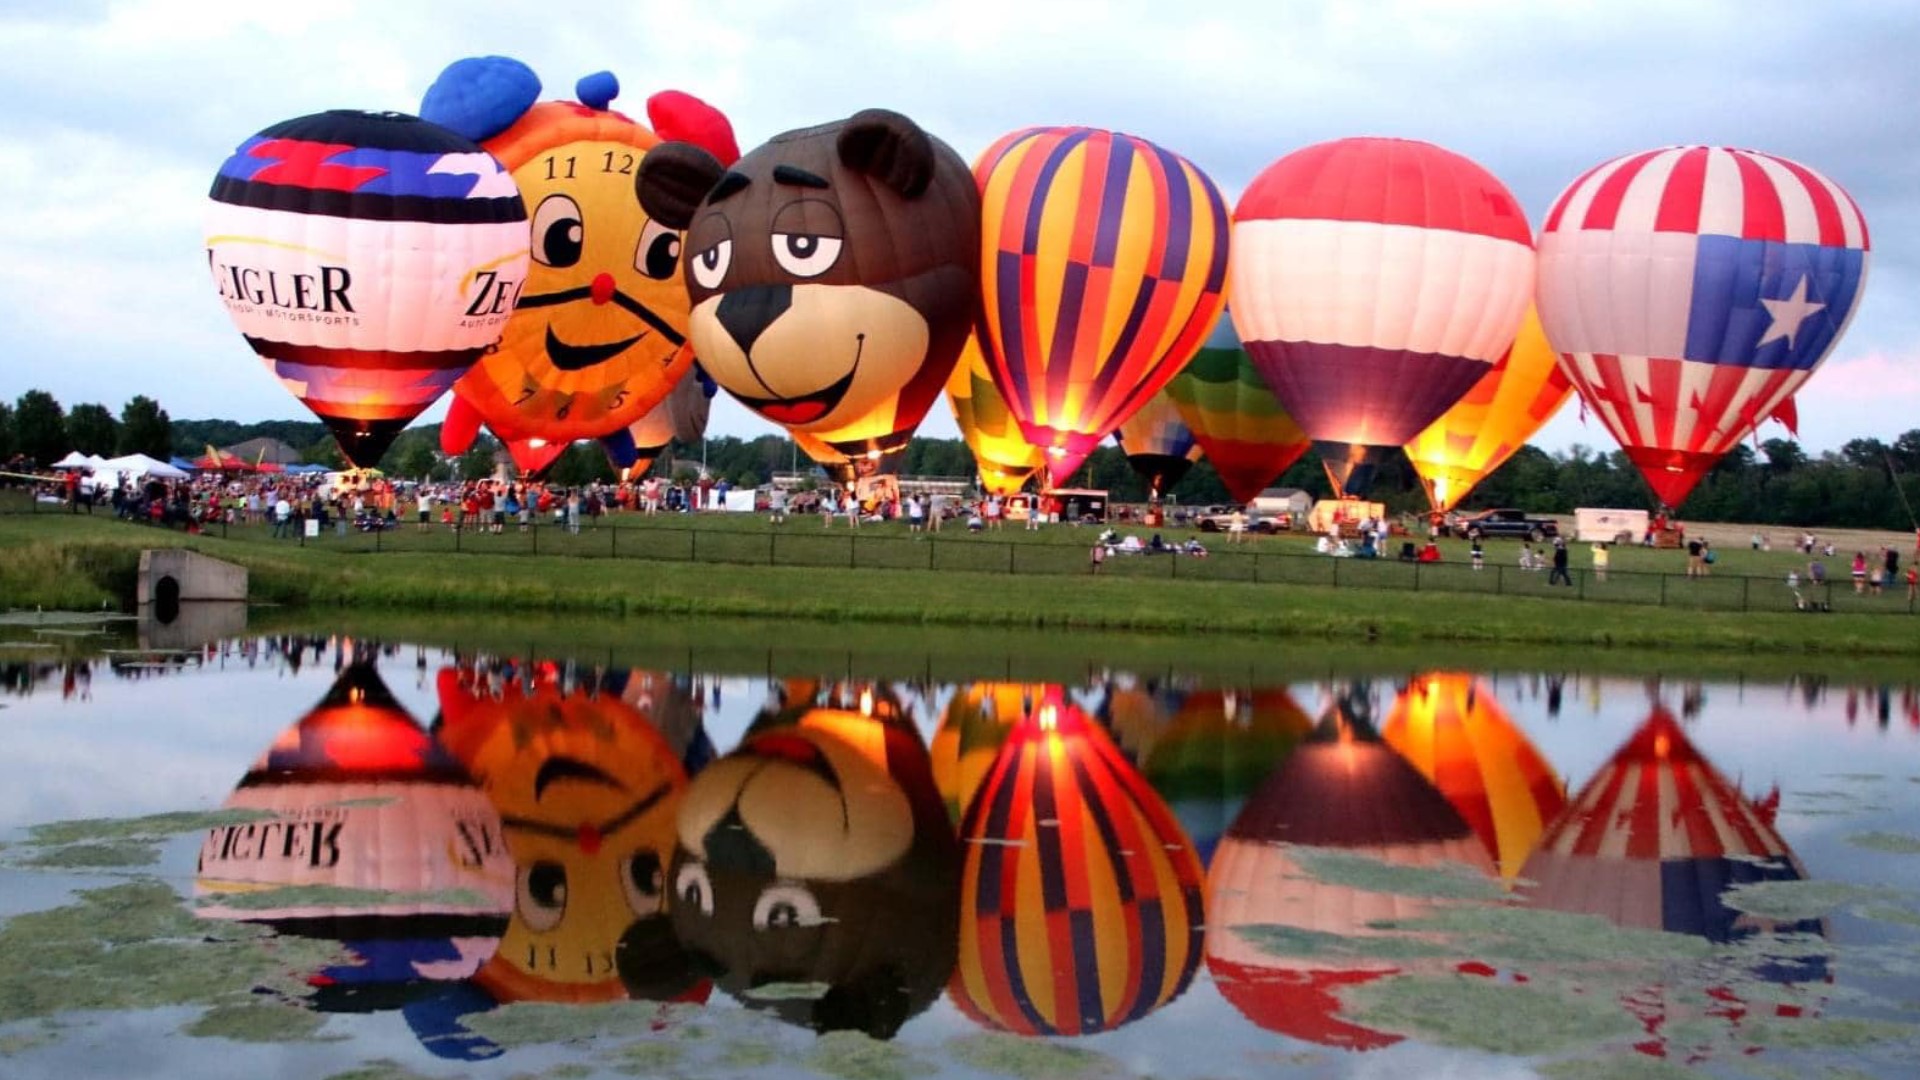 Hudsonville Balloon Days return this Friday and Saturday